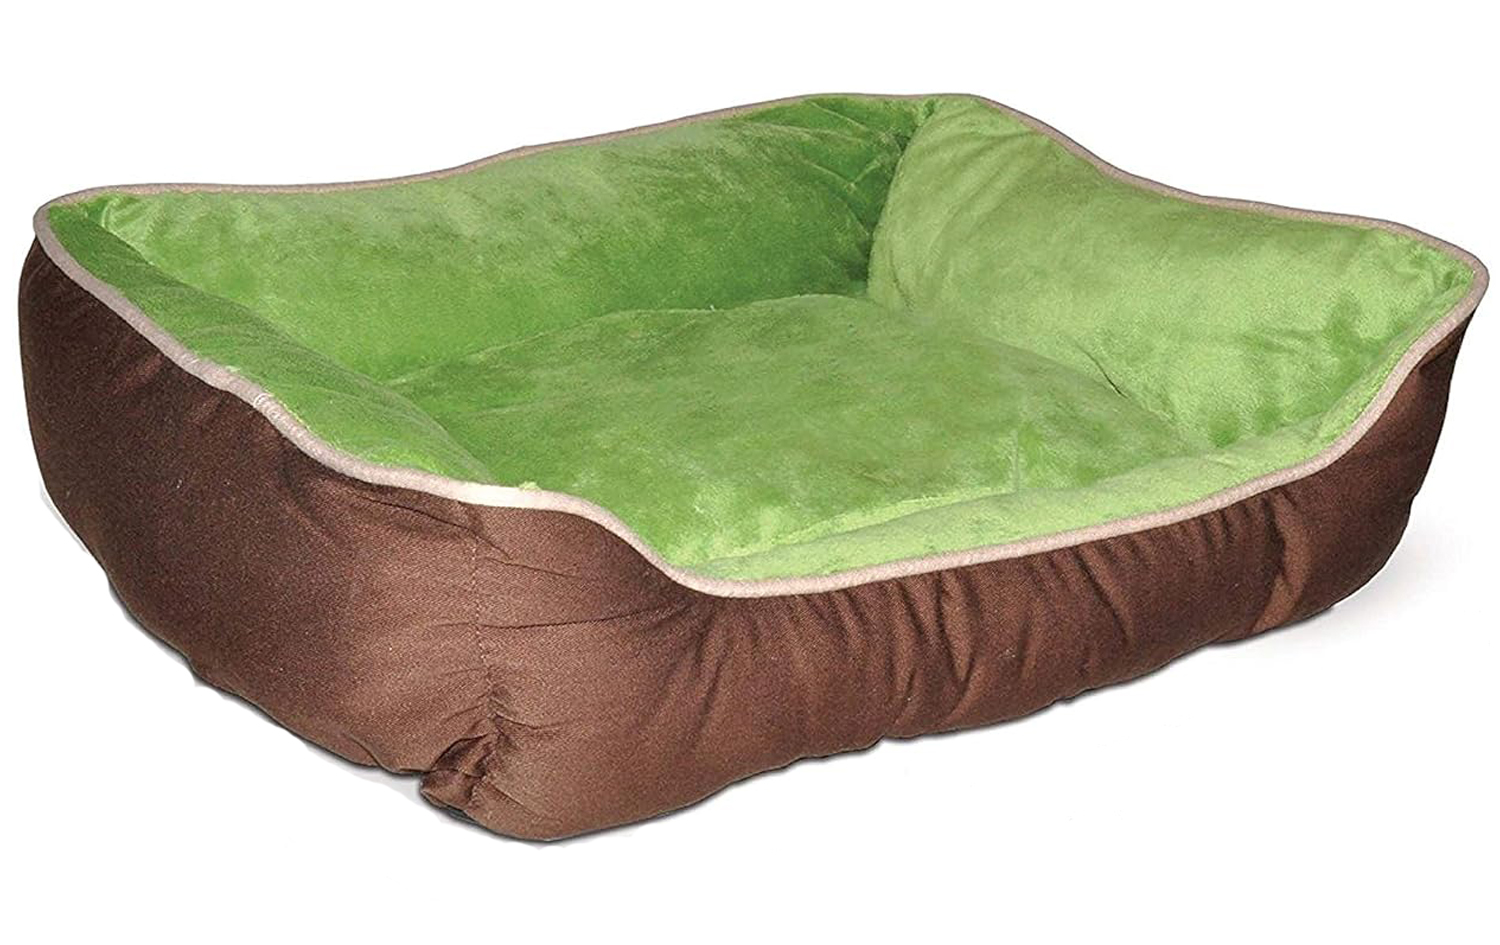 K&H Pet Products Self-Warming Lounge Sleeper Pet Bed